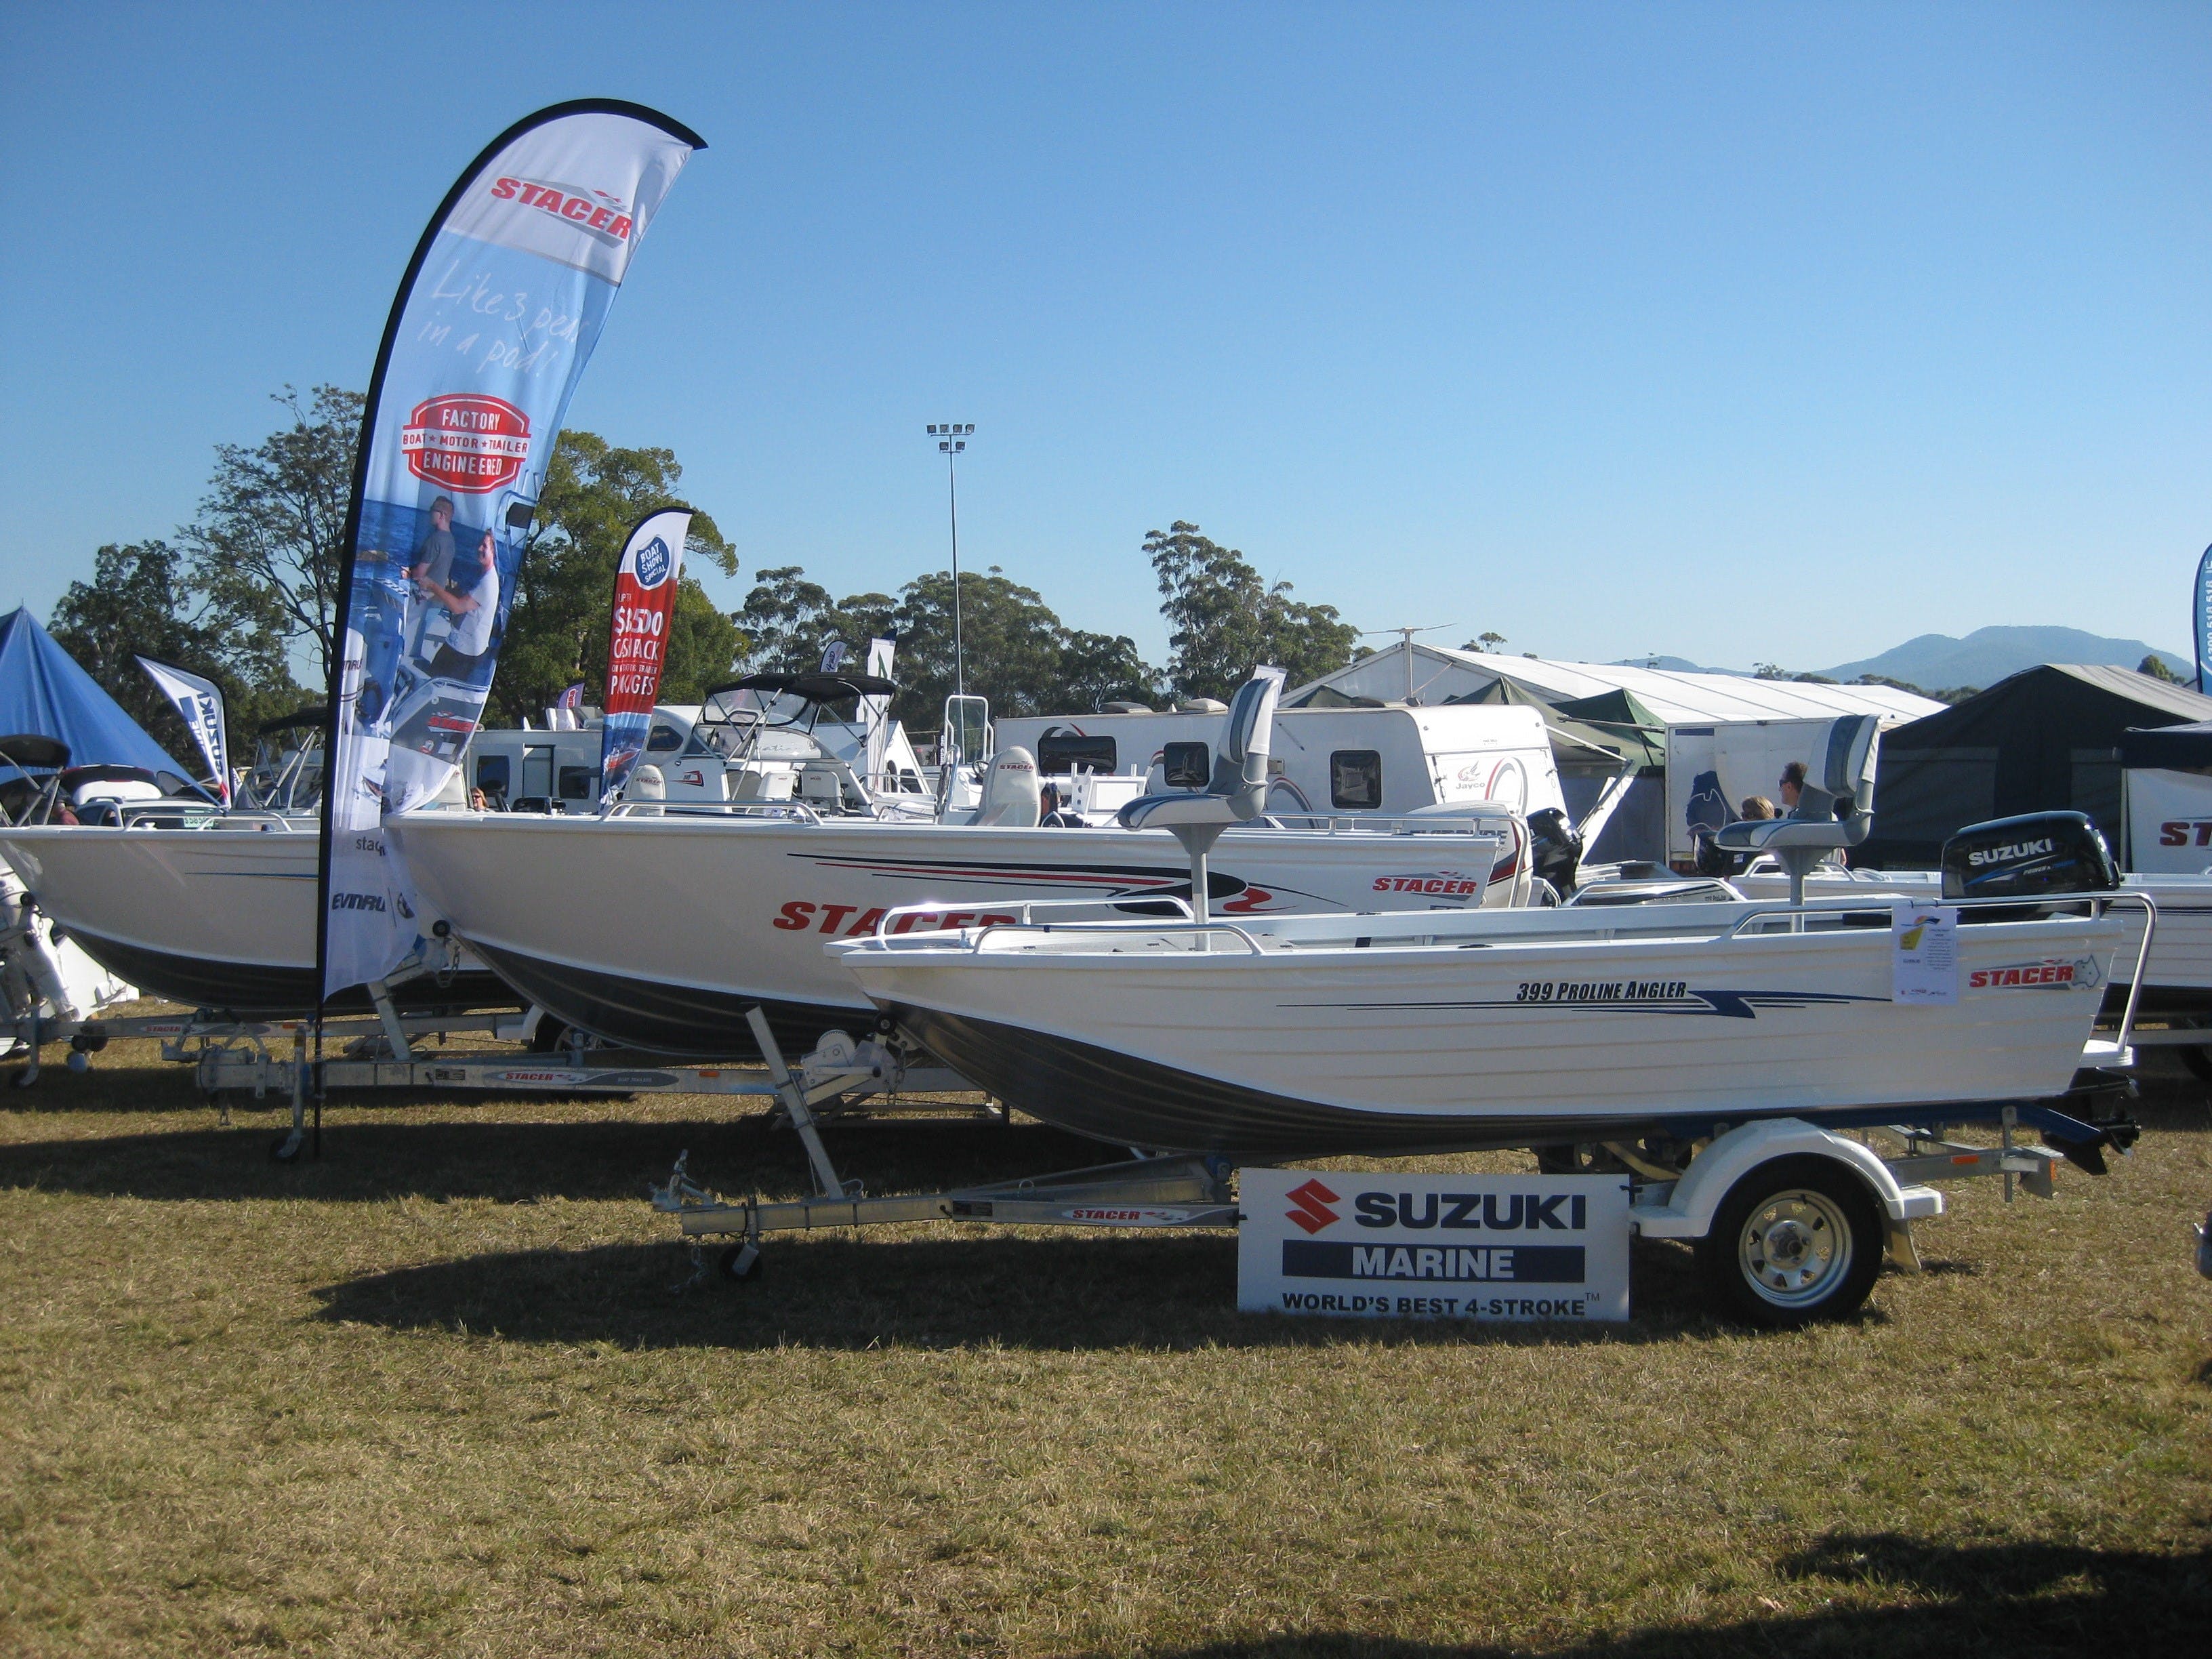 Mid North Coast Caravan Camping 4WD Fish and Boat Show - Geraldton Accommodation